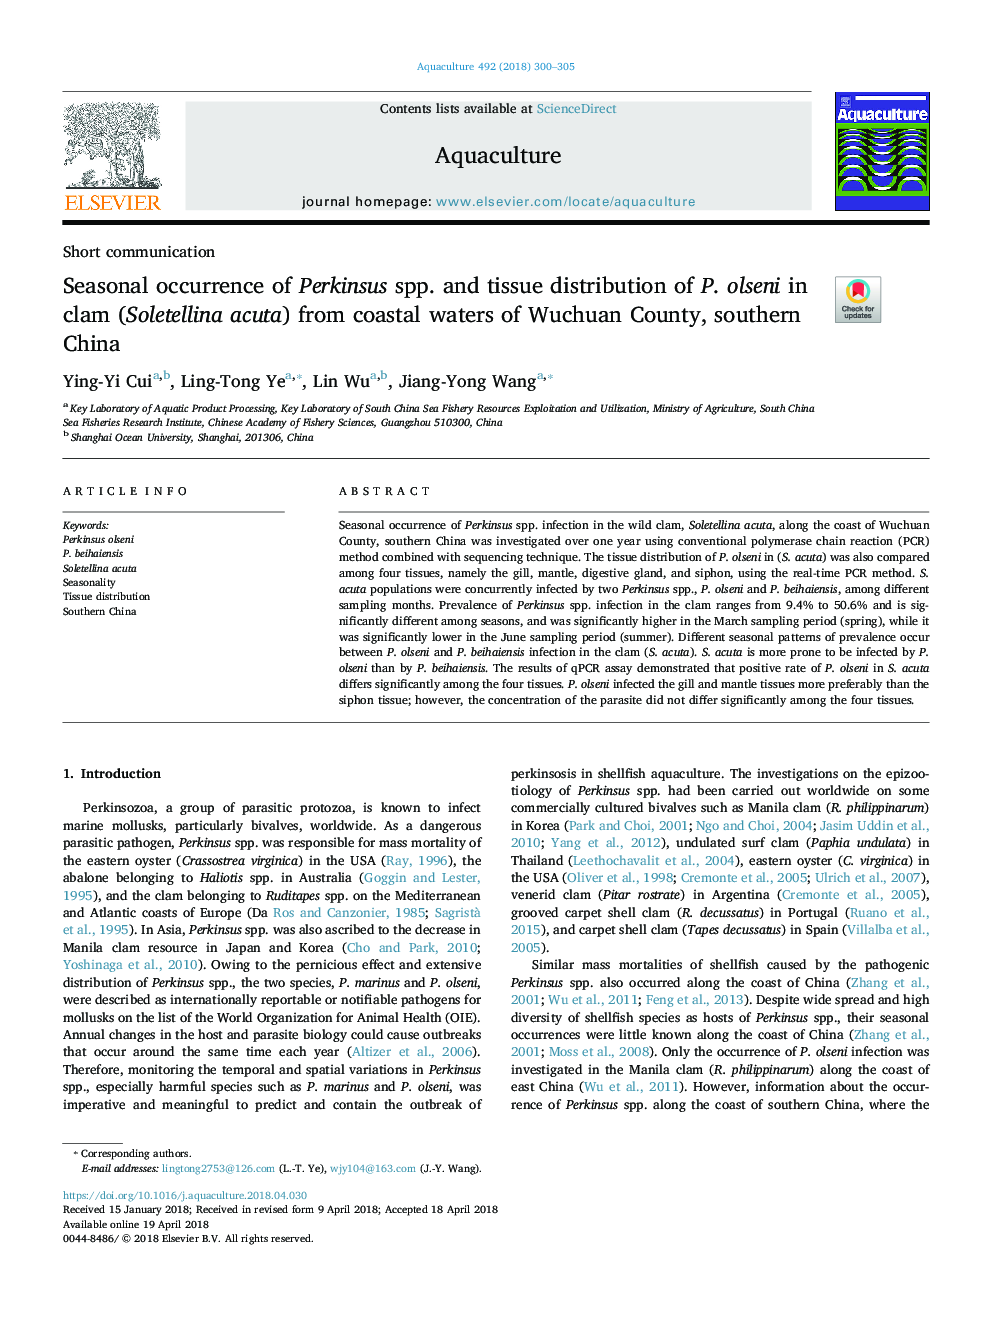 Seasonal occurrence of Perkinsus spp. and tissue distribution of P. olseni in clam (Soletellina acuta) from coastal waters of Wuchuan County, southern China